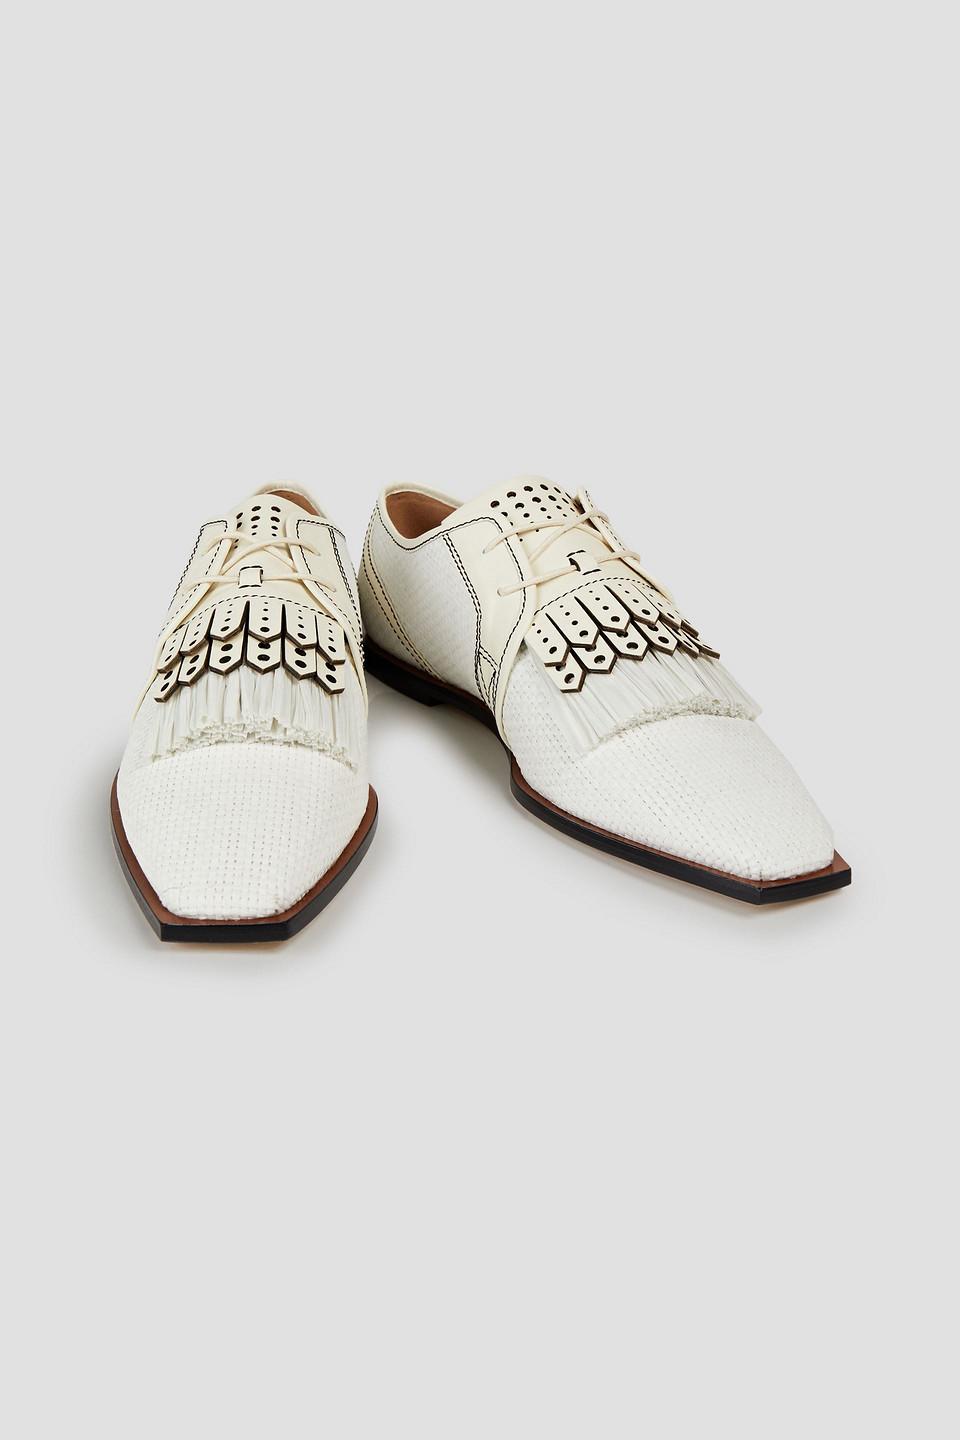 Zimmermann Fringed Leather-trimmed Raffia Brogues in White | Lyst